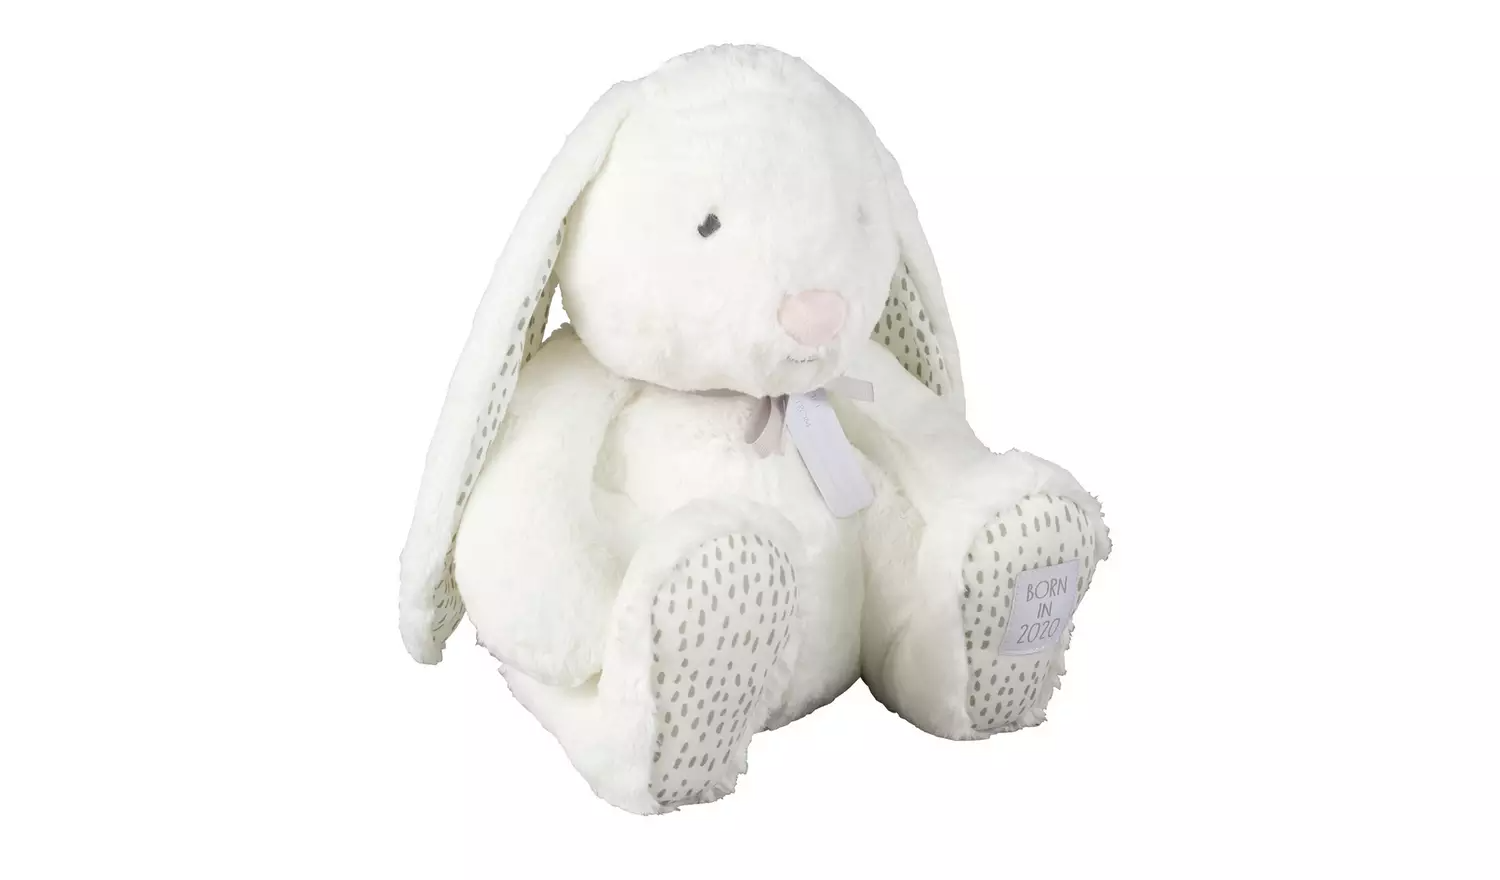 Baby 2020 My First Bunny Soft Toy